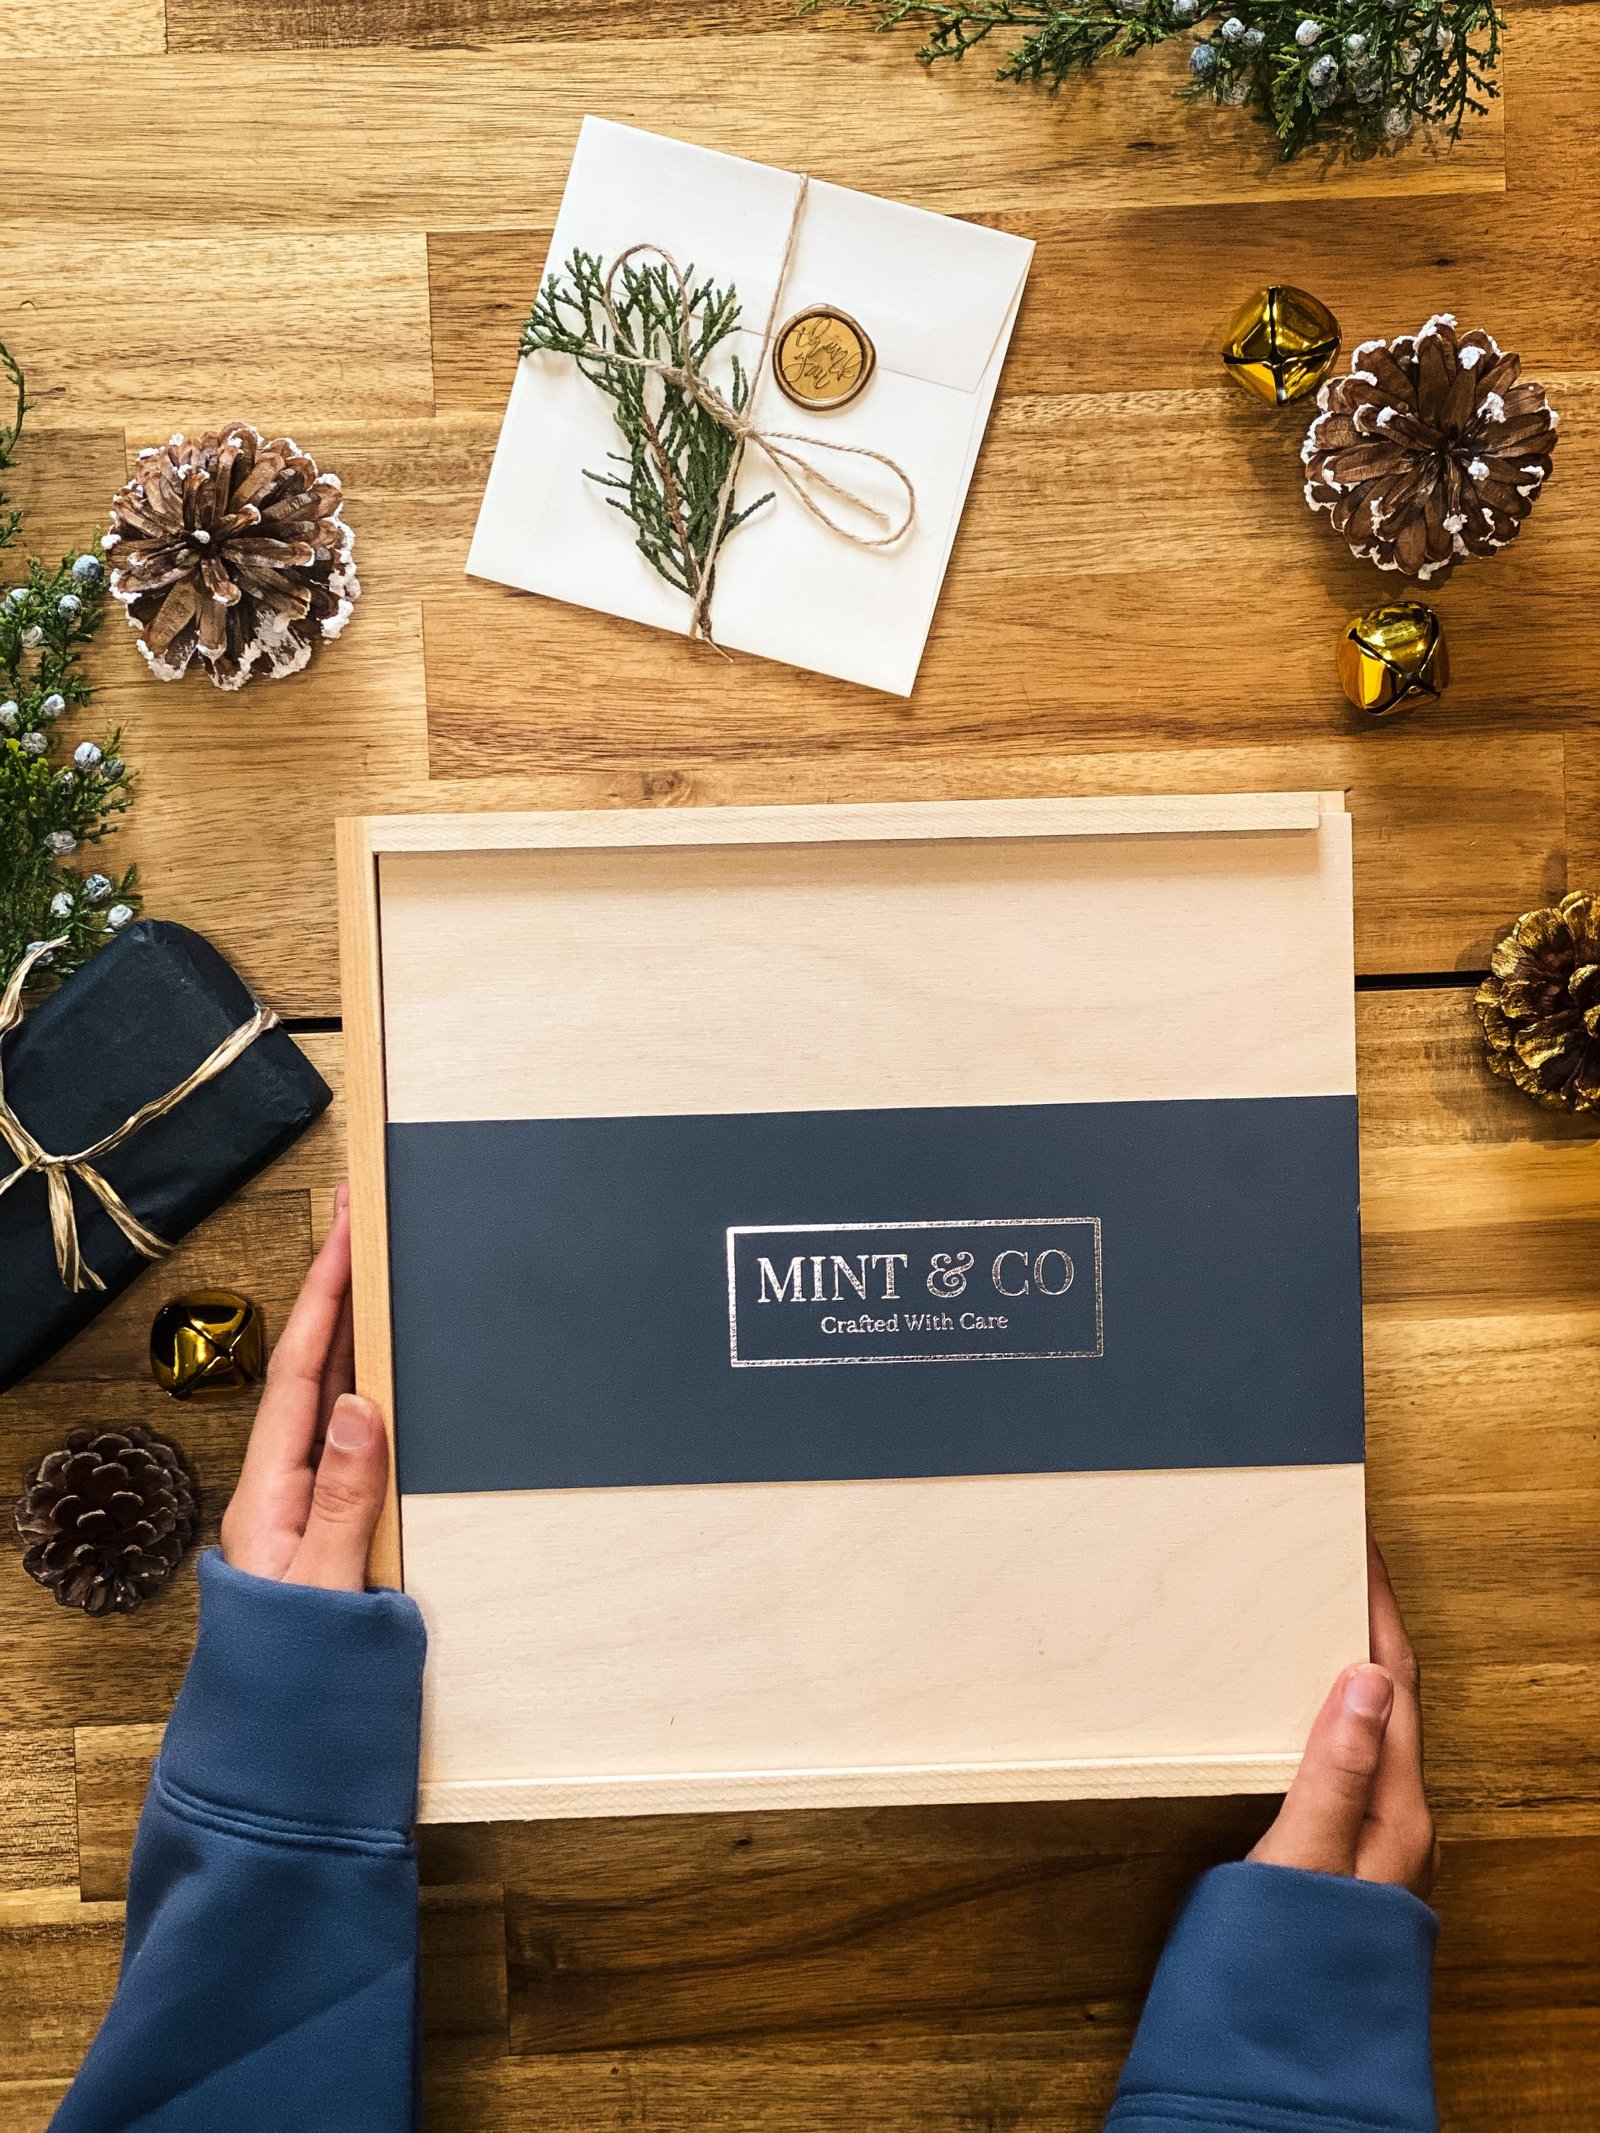 Corporate gifts Toronto, Client gifts , Mint & Co